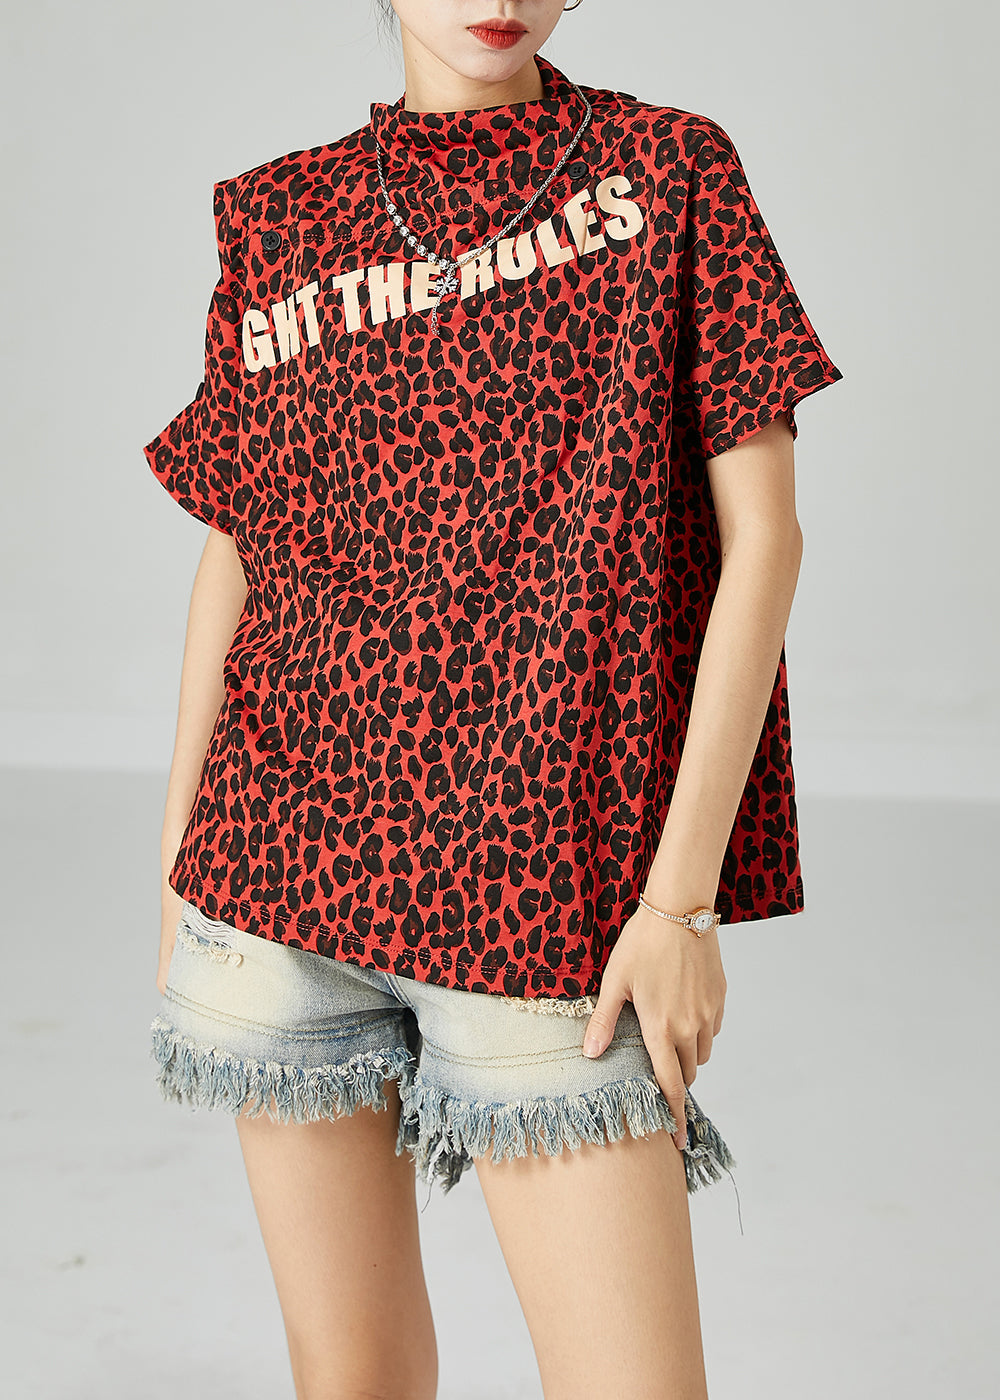 Red Leopard Print Cotton Tanks Stand Collar Cold Shoulder Summer LY2449 - fabuloryshop